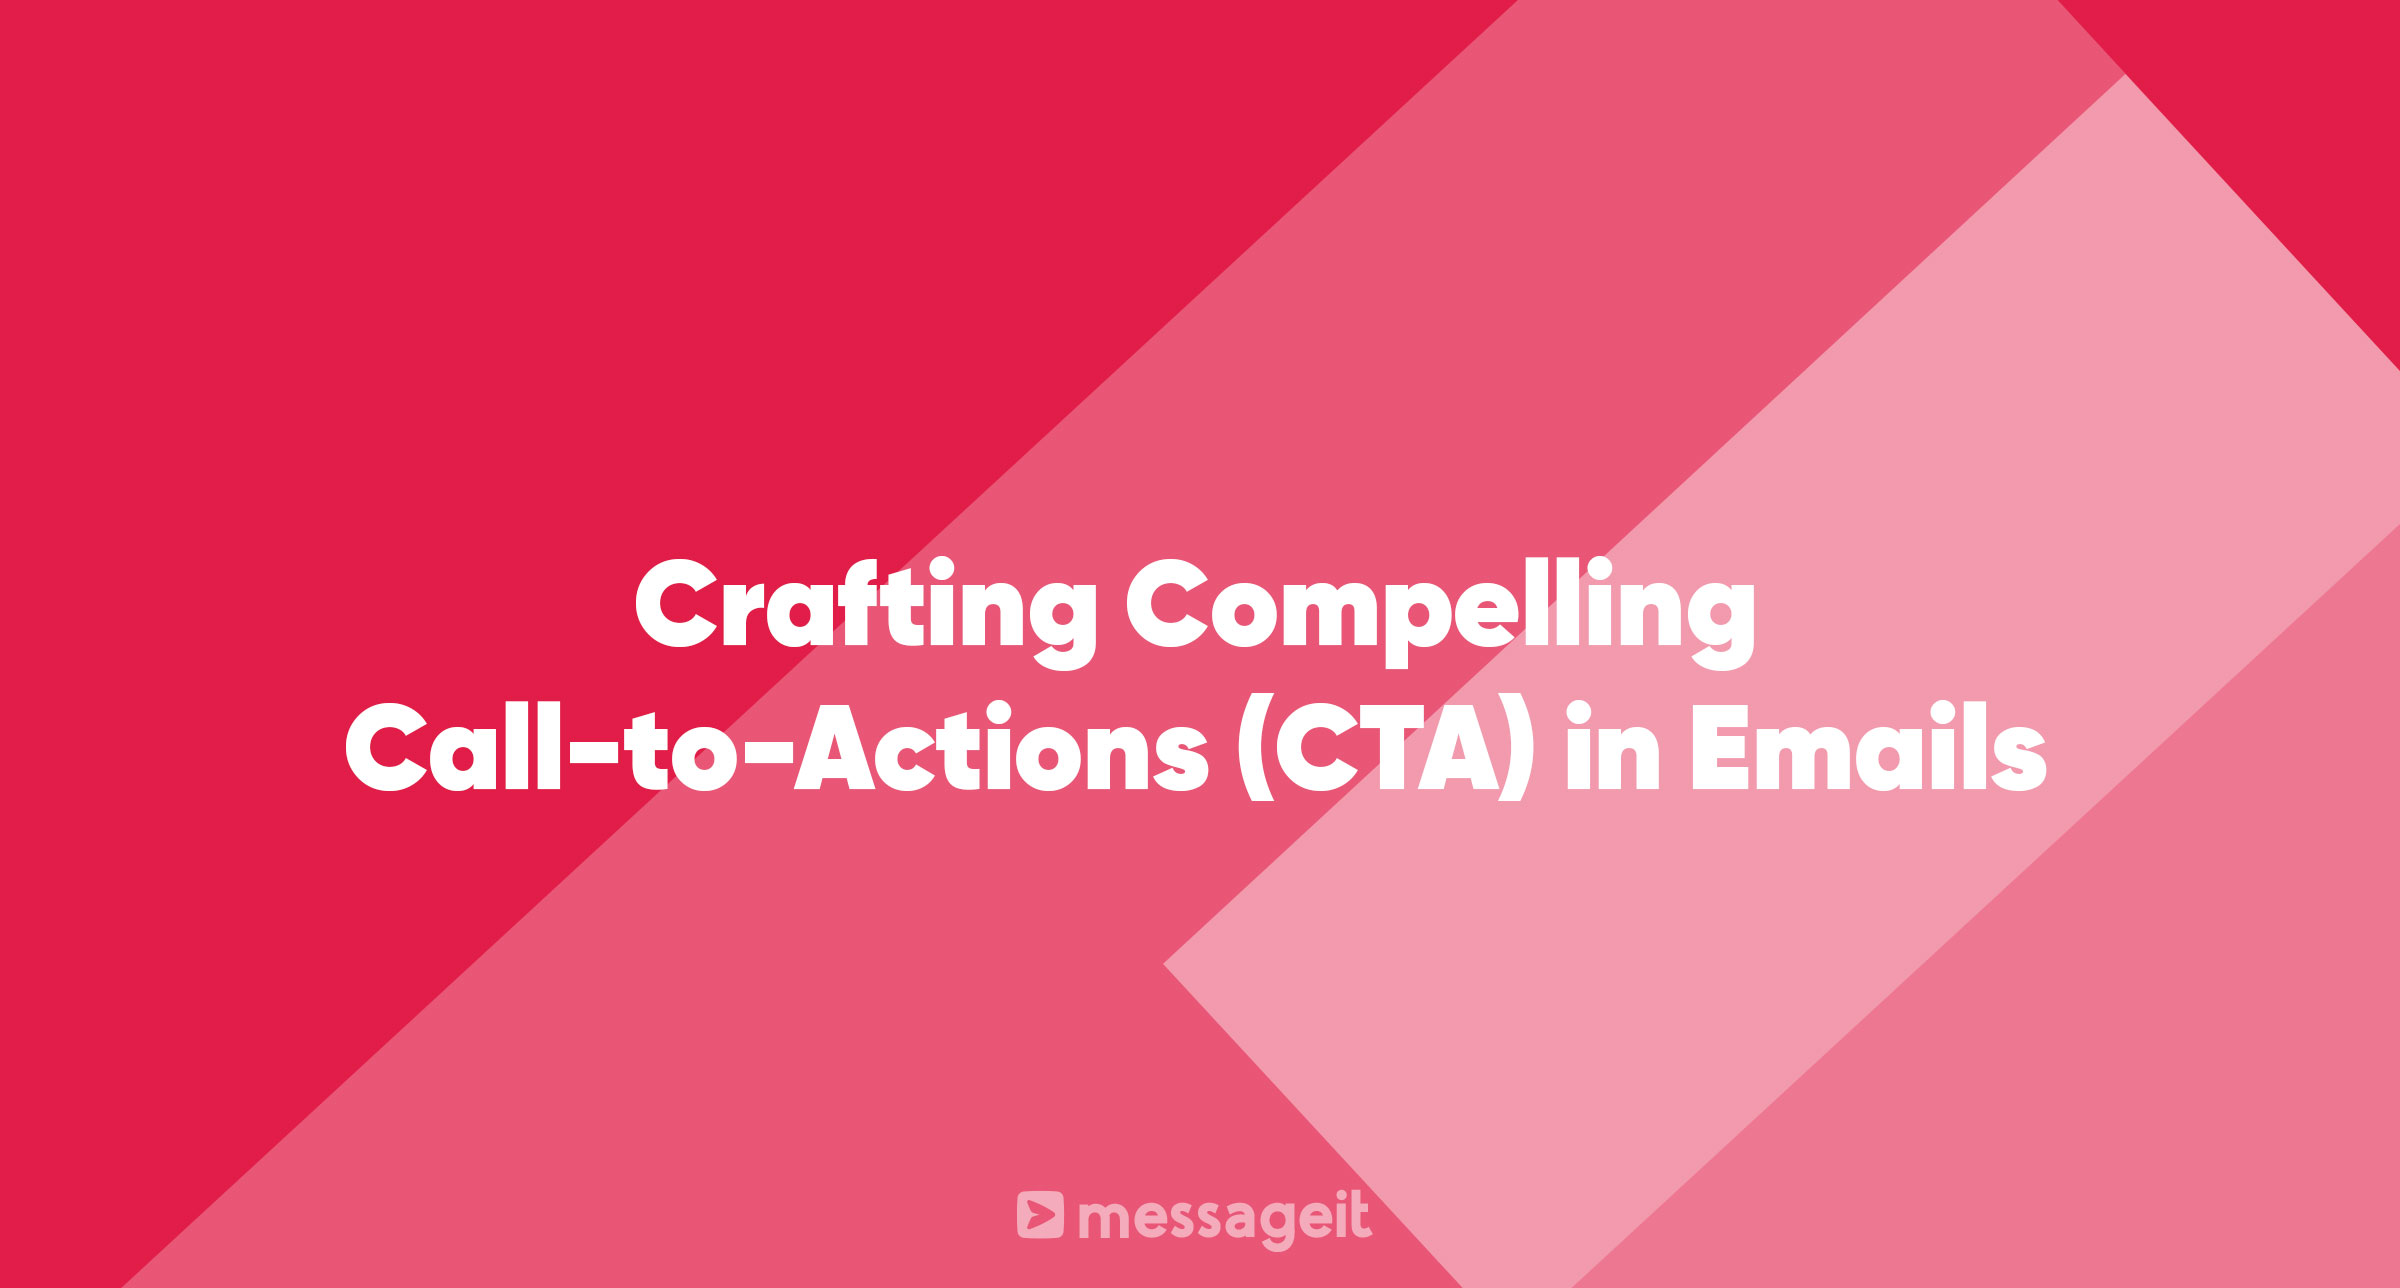 Article | Crafting Compelling Call-to-Actions (CTA) in Emails